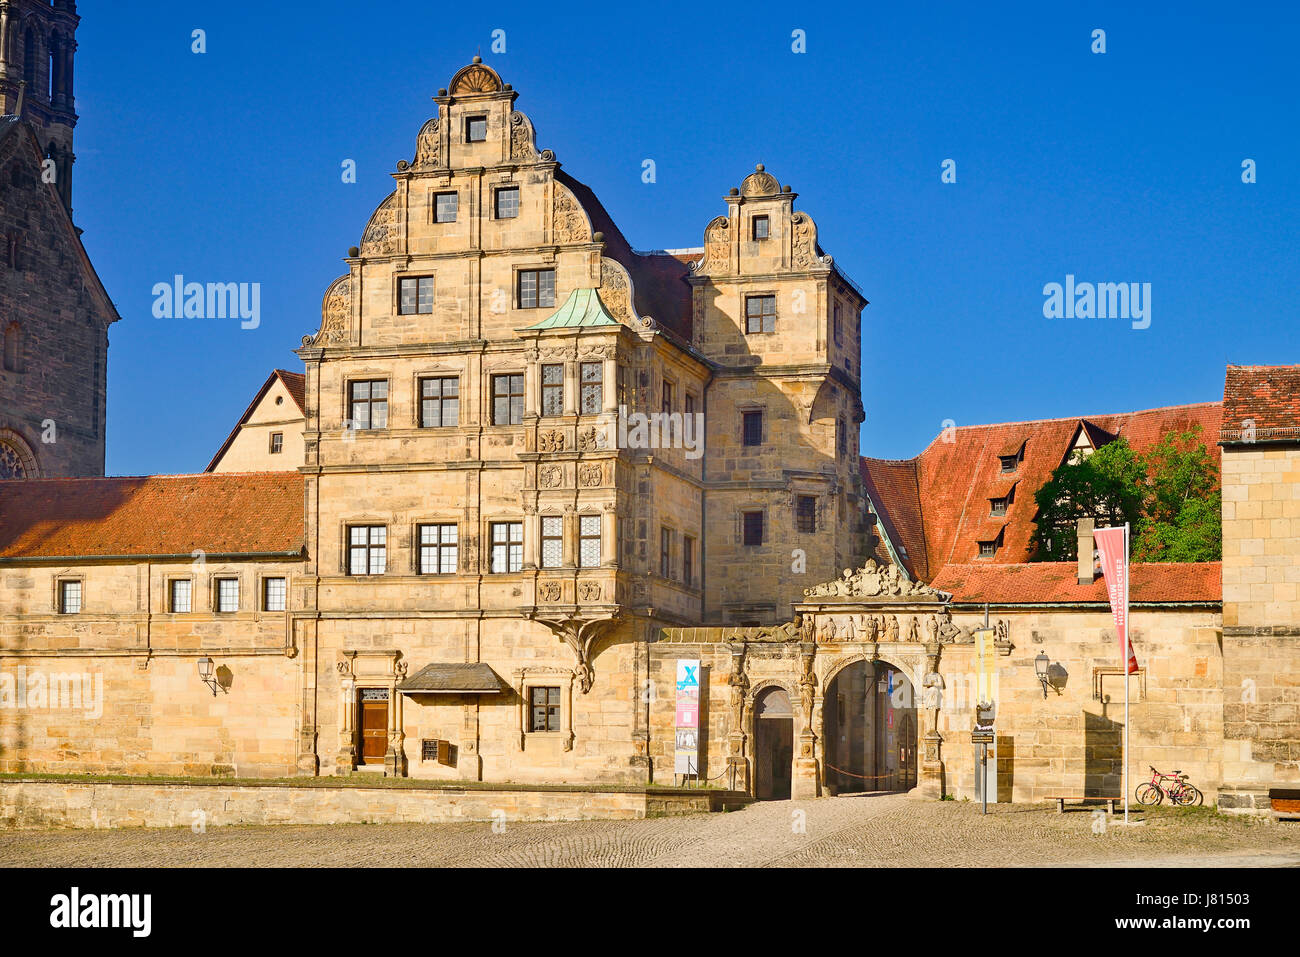 Germany, Bavaria, Bamberg, Alte Hofhaltung or Old Imperial Court. Stock Photo